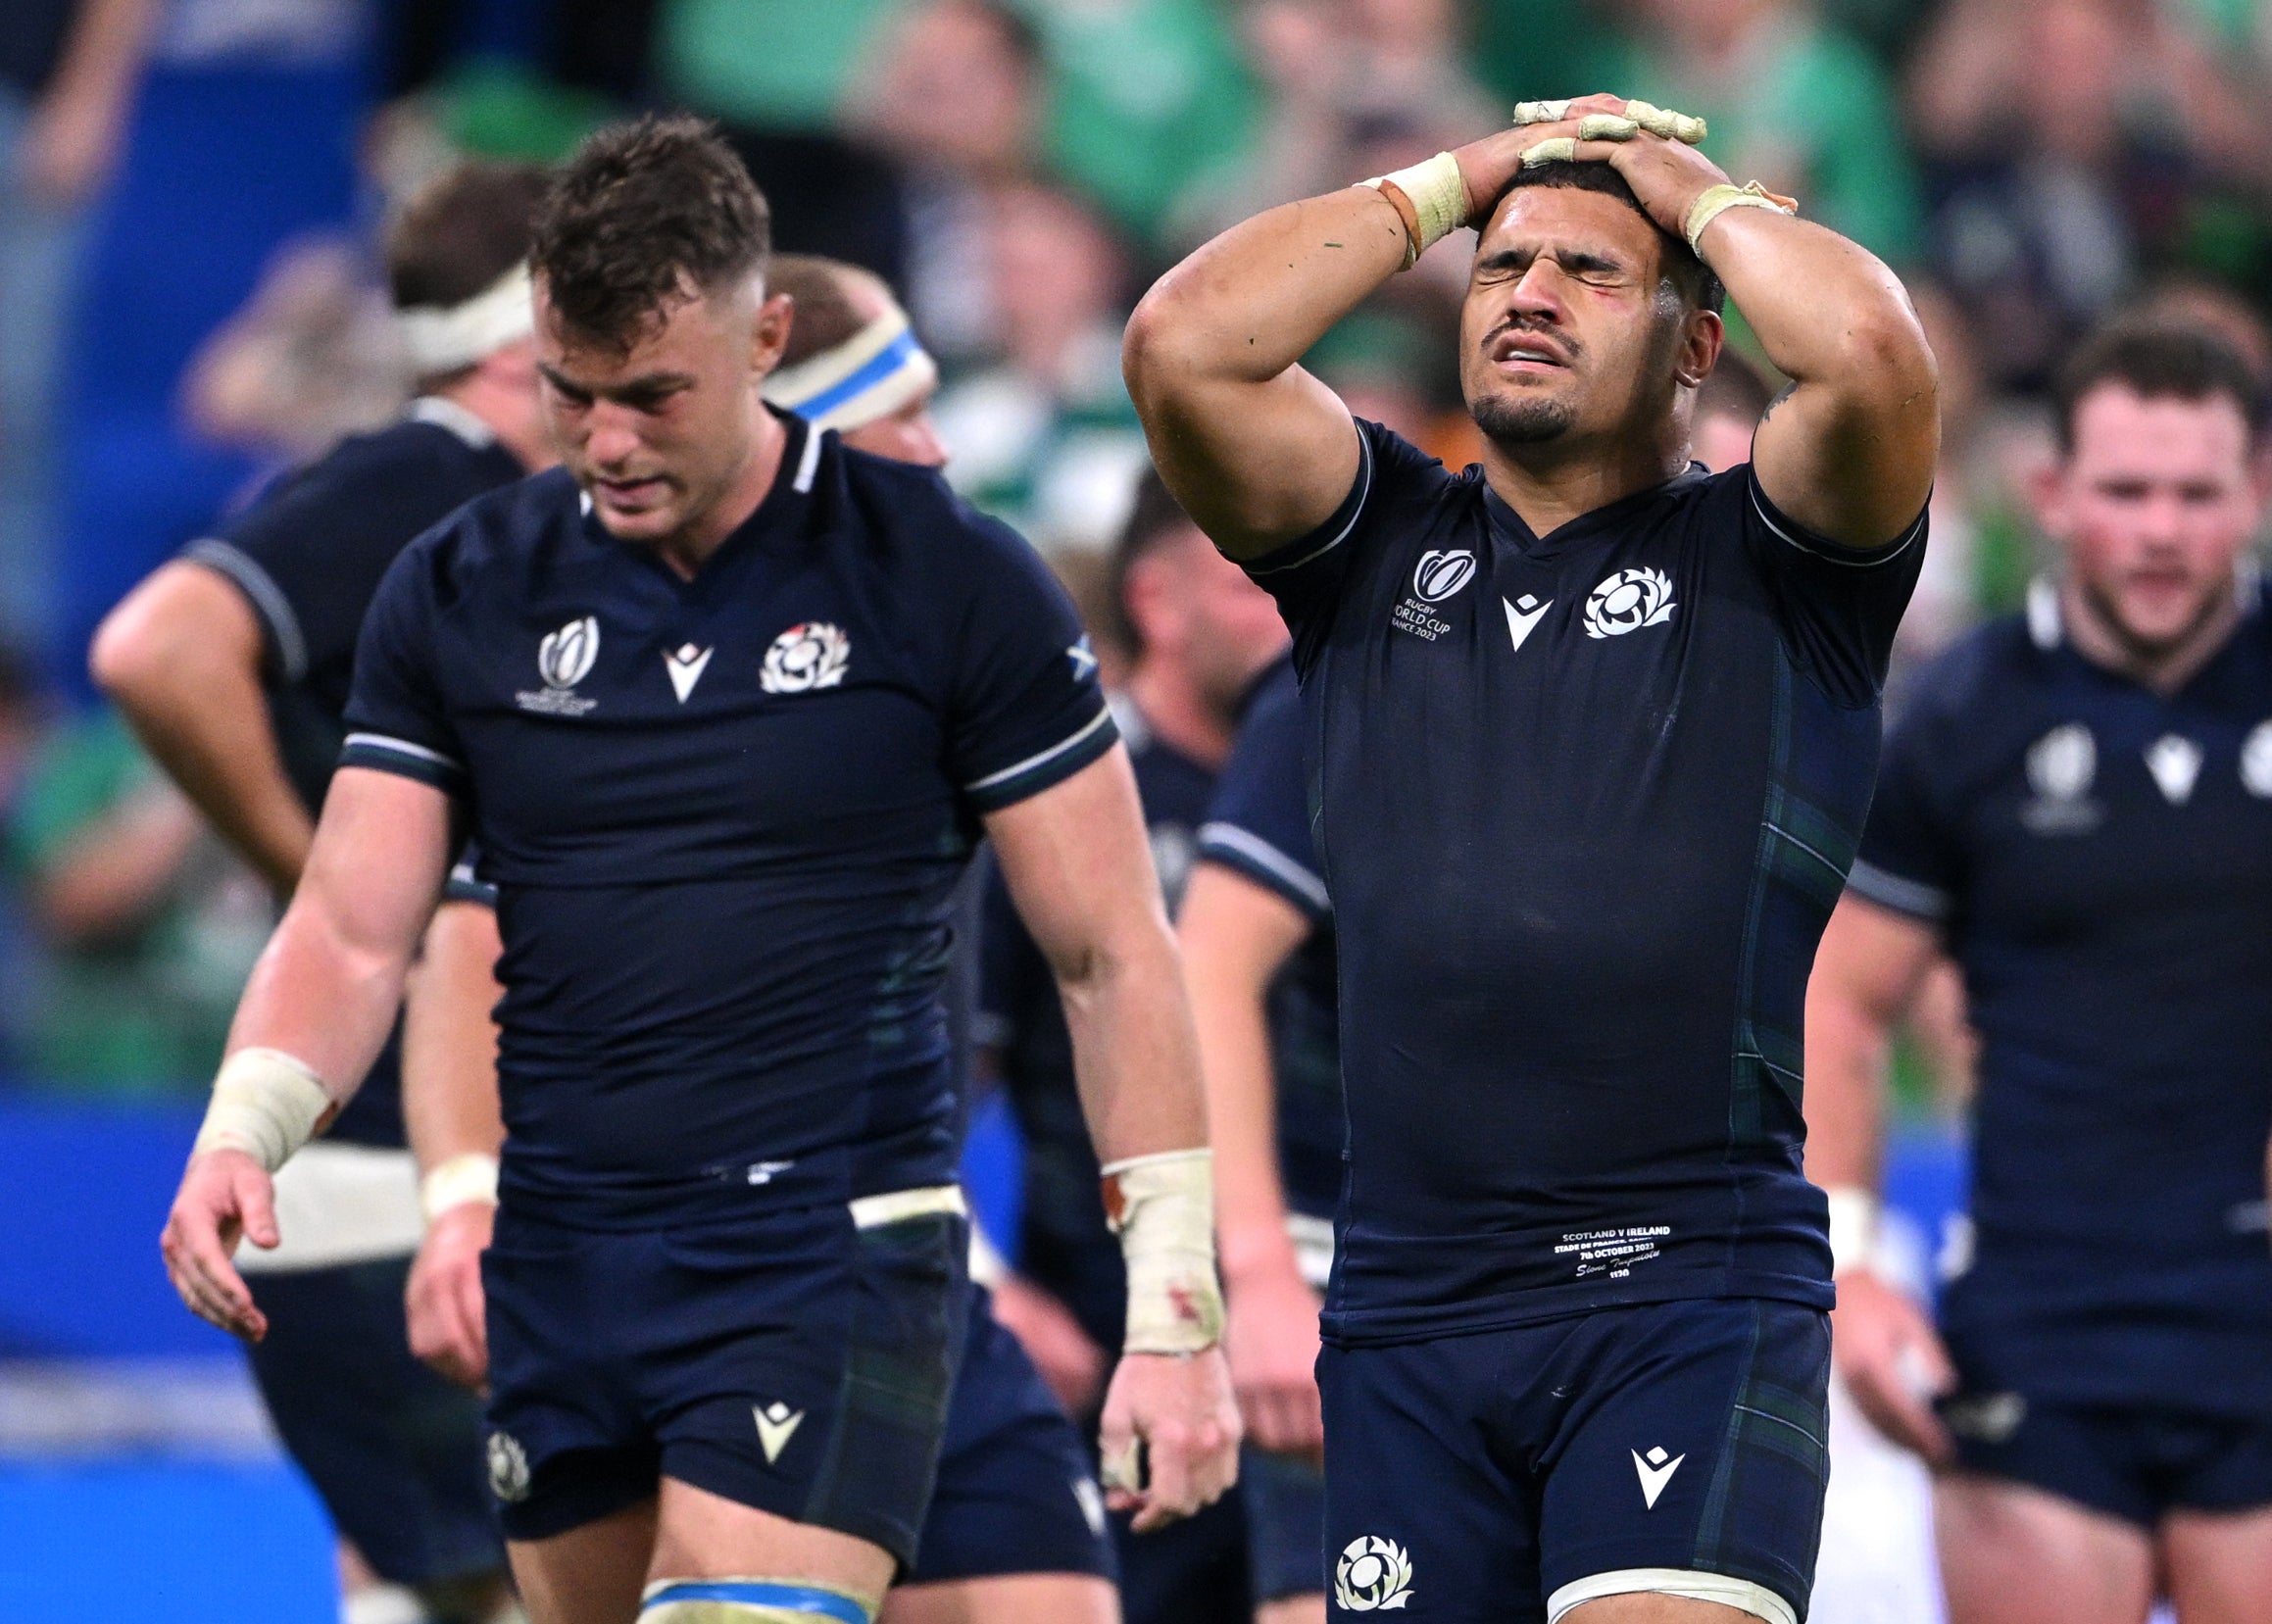 Scotland again failed to reach the quarter-finals after a similarly premature departure four years ago